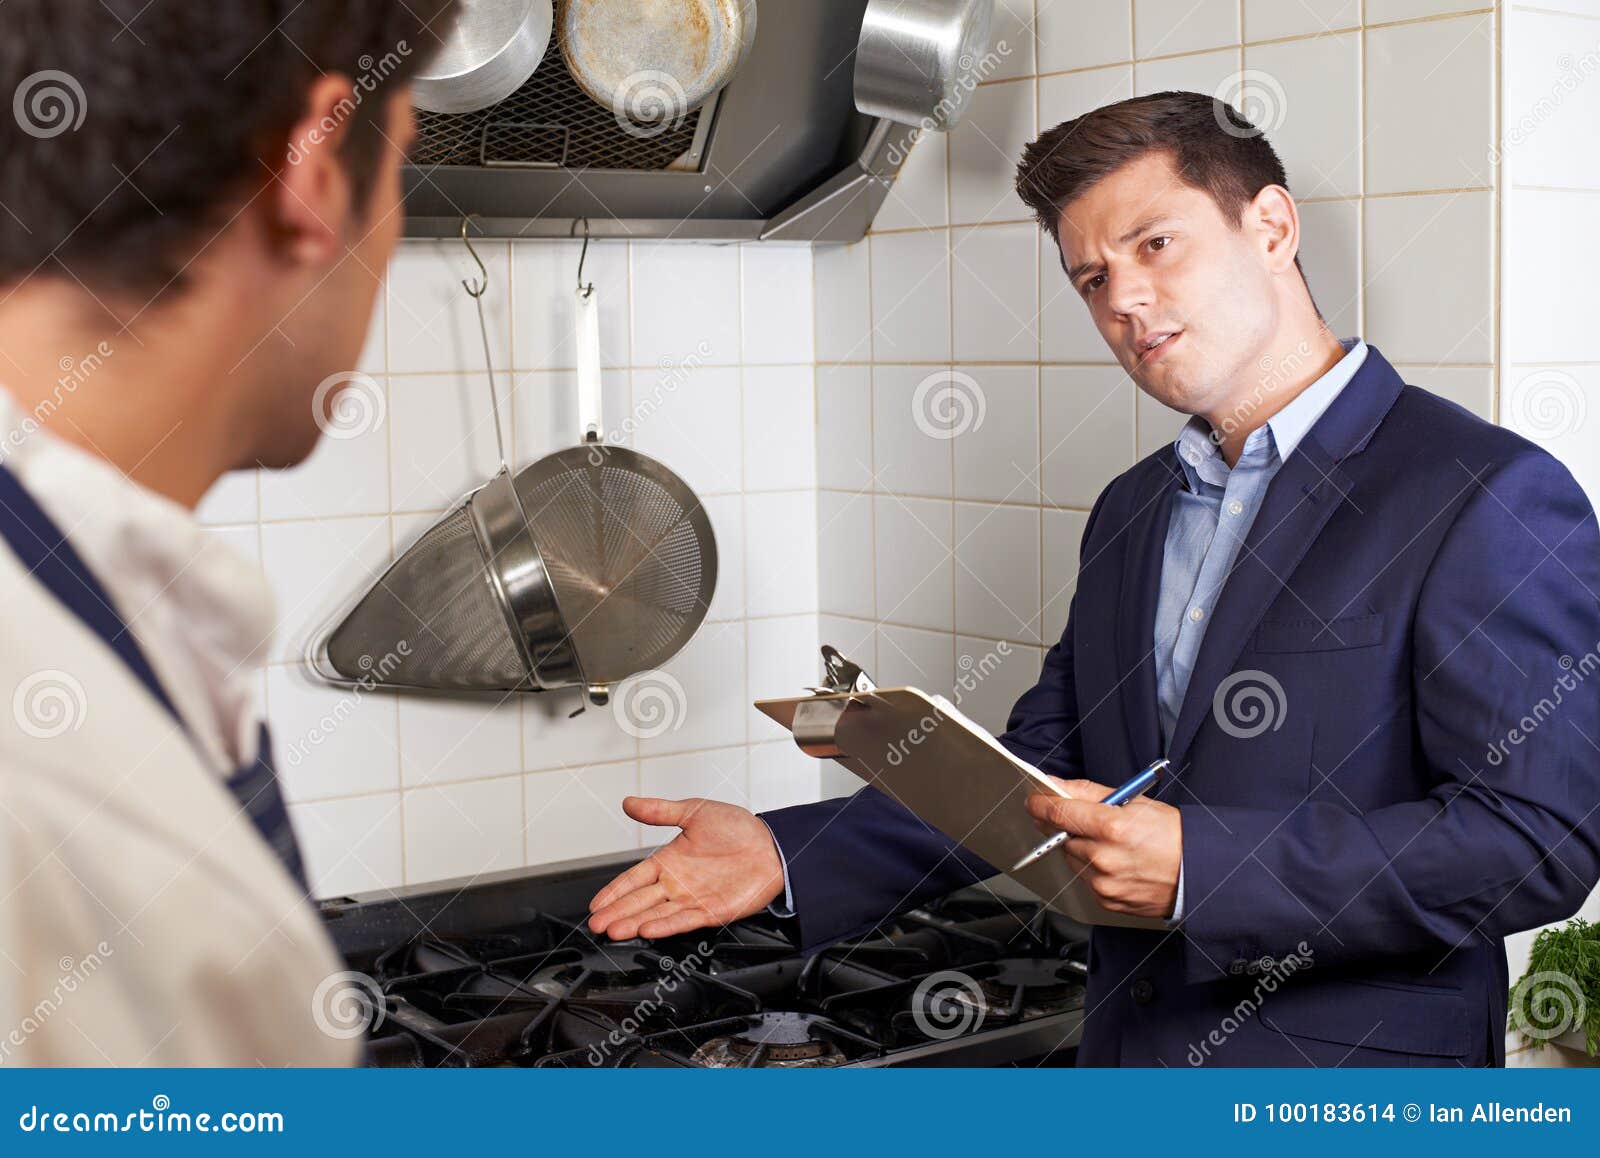 health inspector meeting with chef in restaurant kitchen